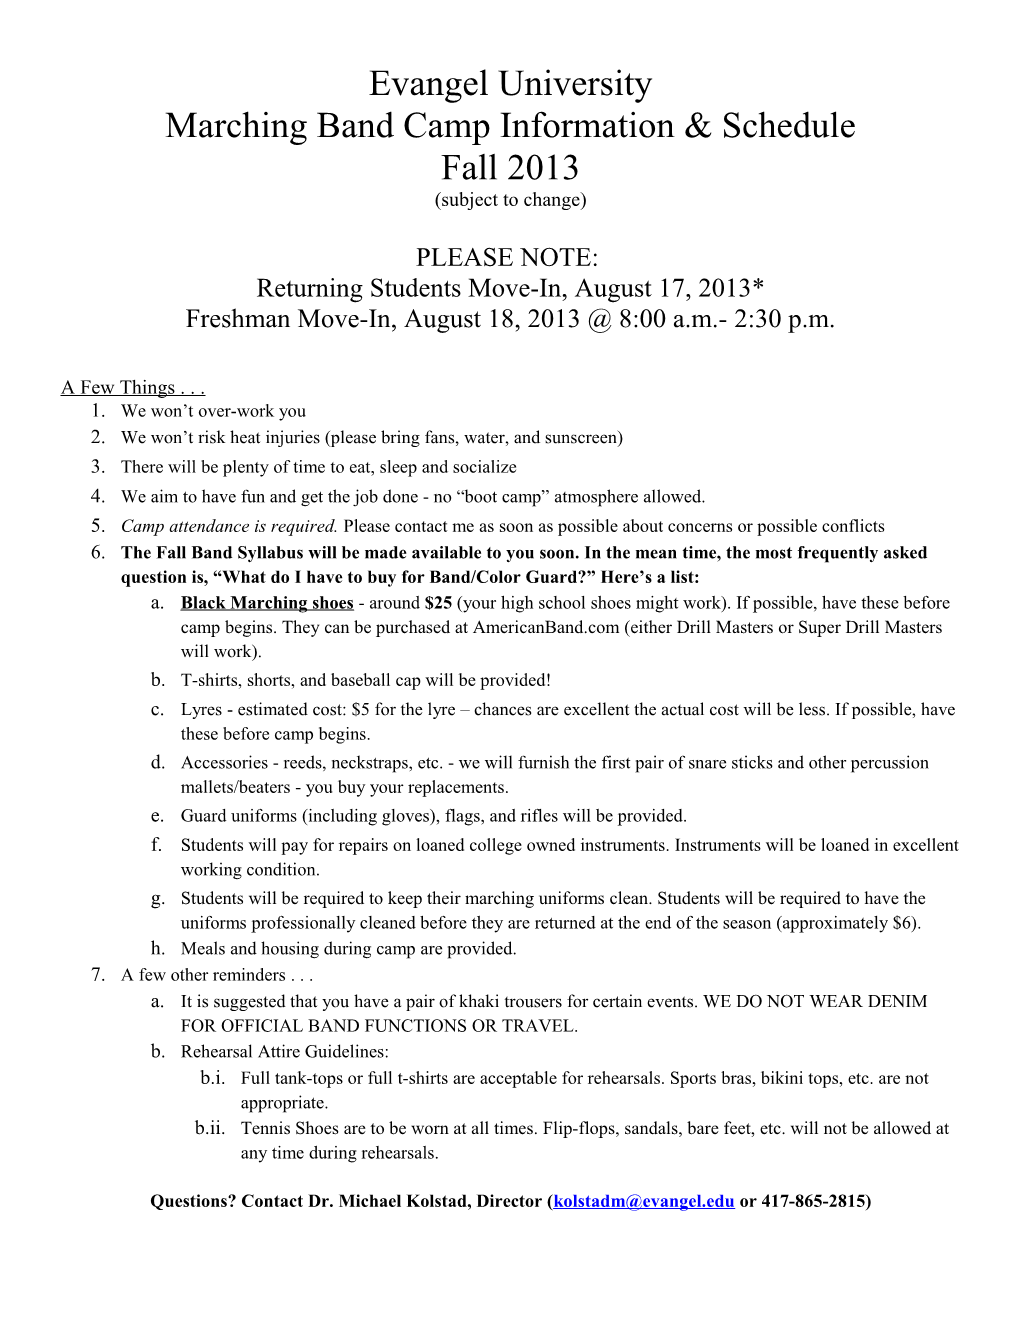 Marching Band Camp Information & Schedule